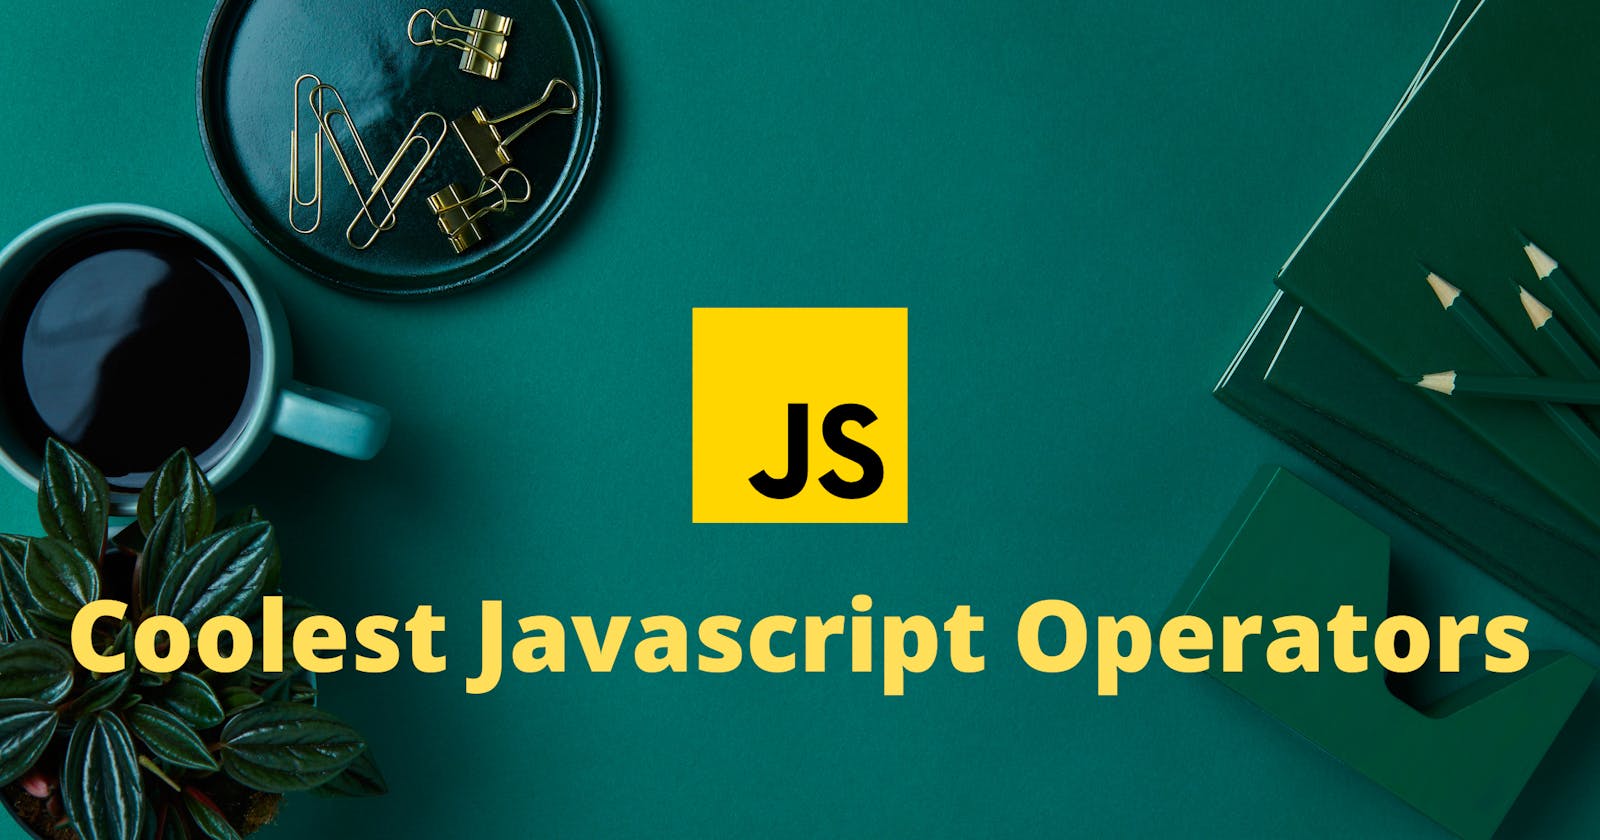 Coolest Javascript operators you wish you would have known earlier